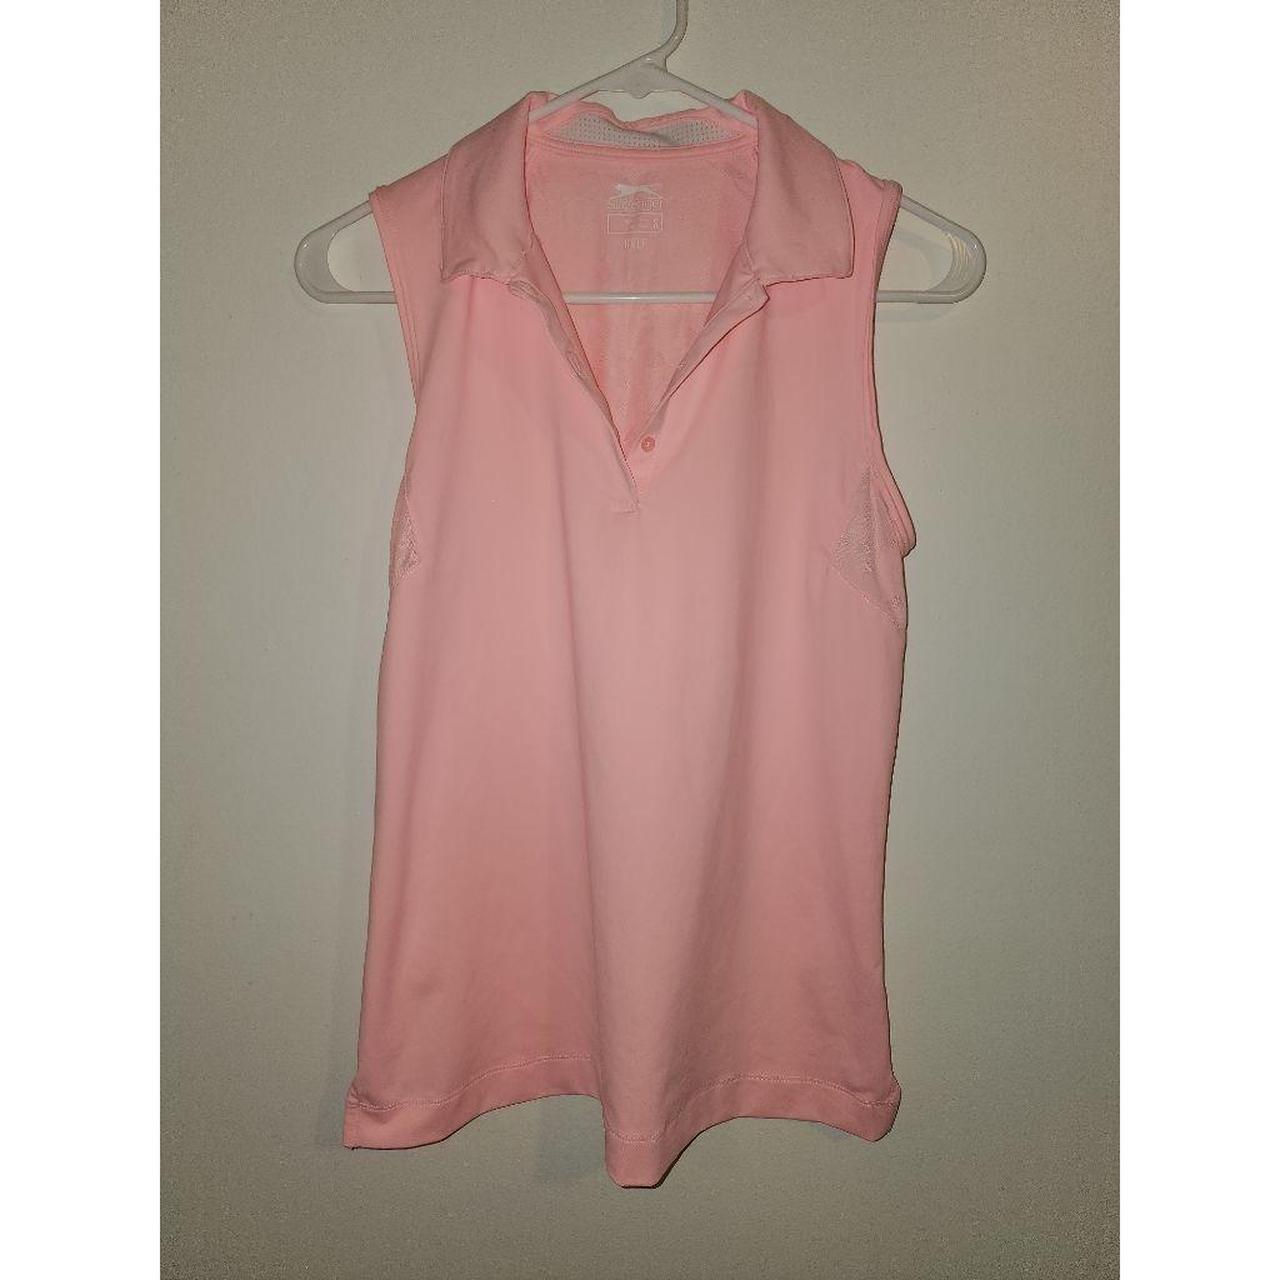 Product Image 1 - Pink
Small 
Buttons down front
Super soft
Collar